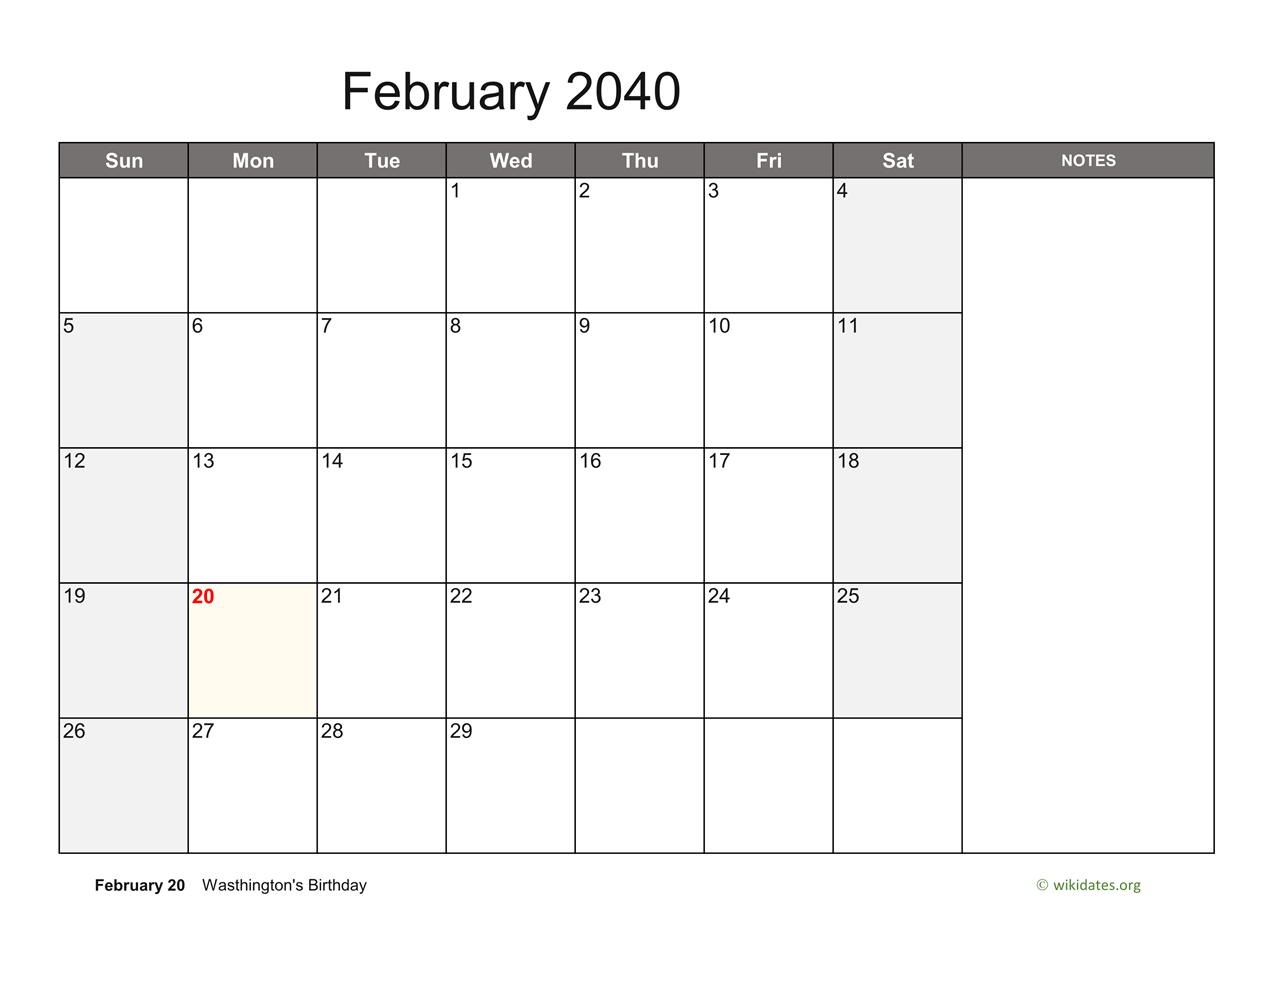 February 2040 Calendar with Notes | WikiDates.org